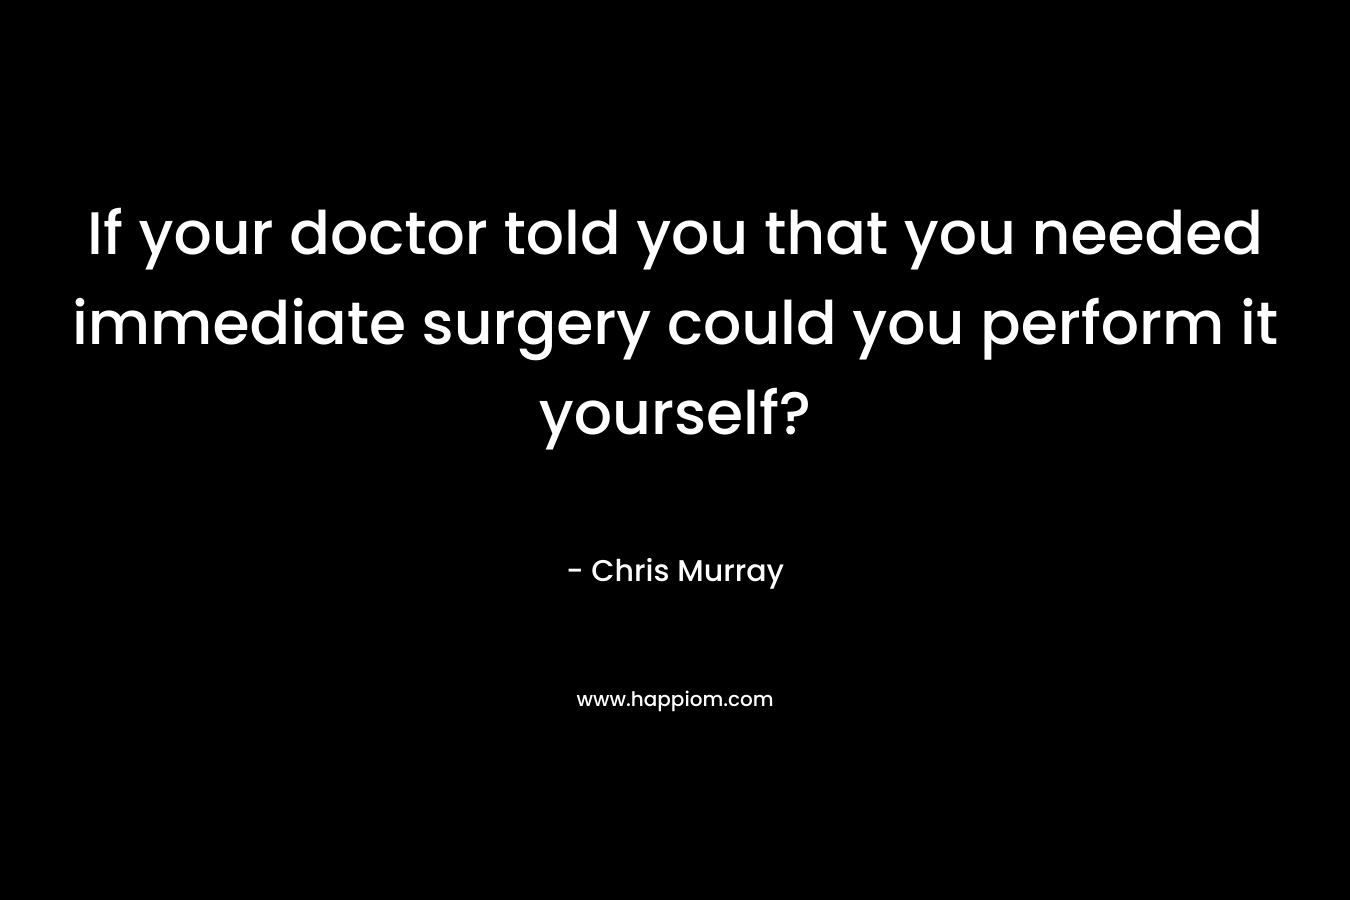 If your doctor told you that you needed immediate surgery could you perform it yourself?